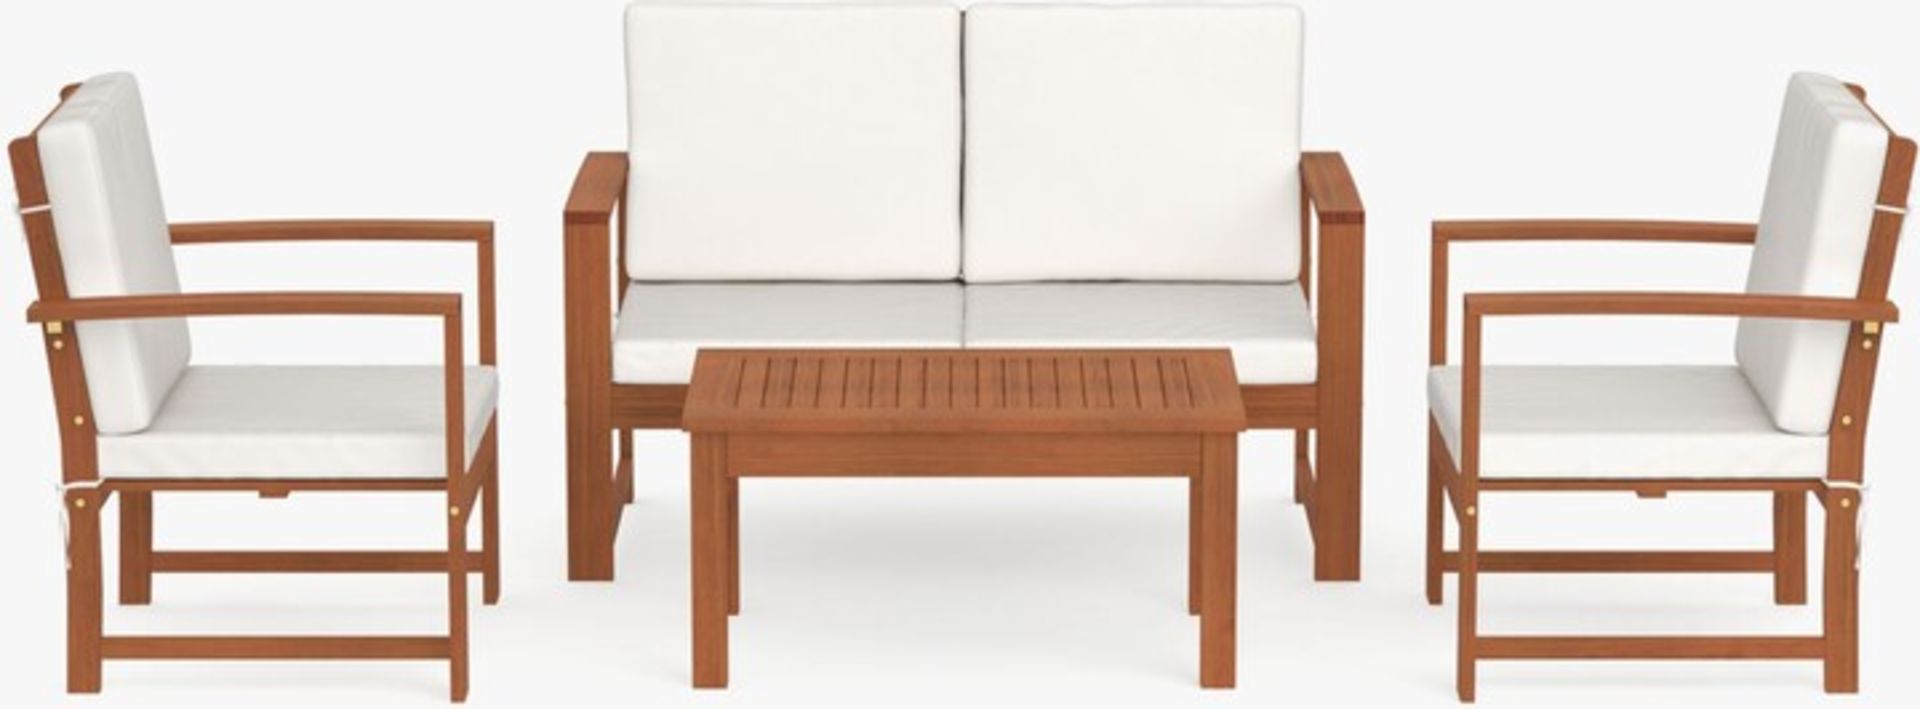 PALLET TO CONTAIN 5 X BRAND NEW JOHN LEWIS 4-Seater Garden Lounging Table & Chairs Set. RRP £898.50. - Image 2 of 3